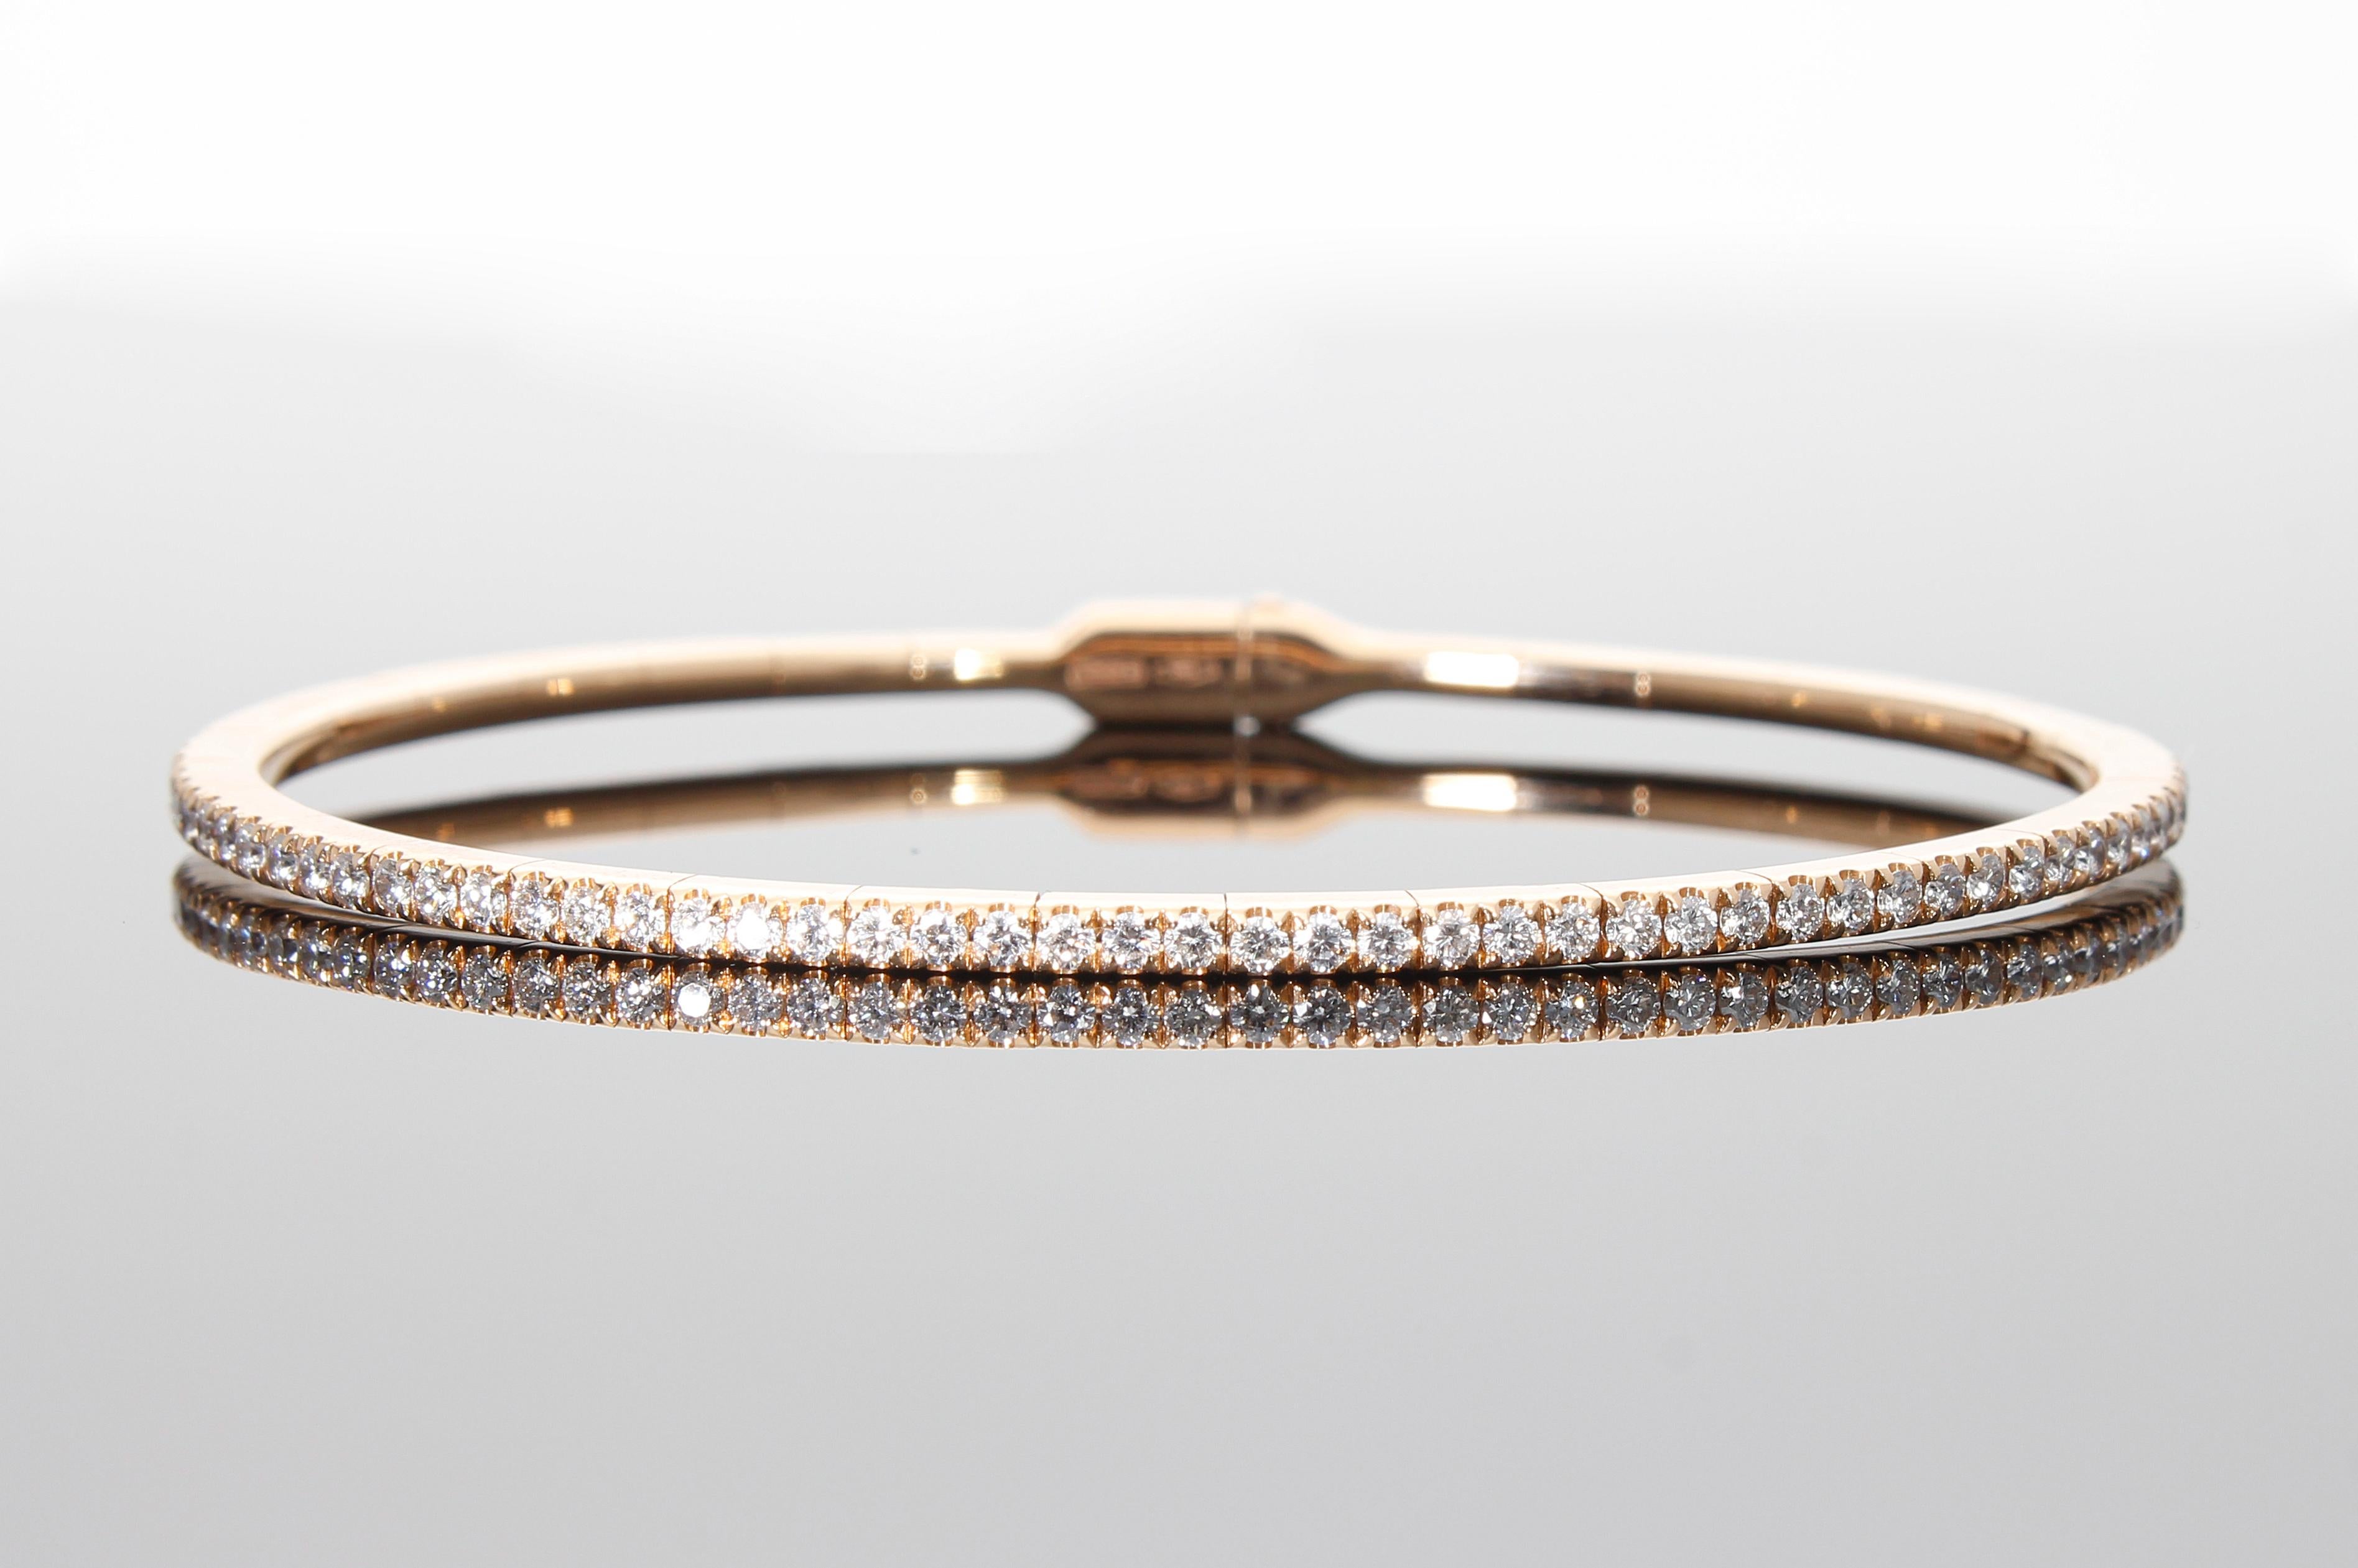 The semi-rigid model bracelet is made up of a row of fifty-one brilliant-cut diamonds, for a total carat weight of 0.75 ct. I
ts frame is made up of various segments that make it elastic and comfortably wearable. 
It has a closure in the back which